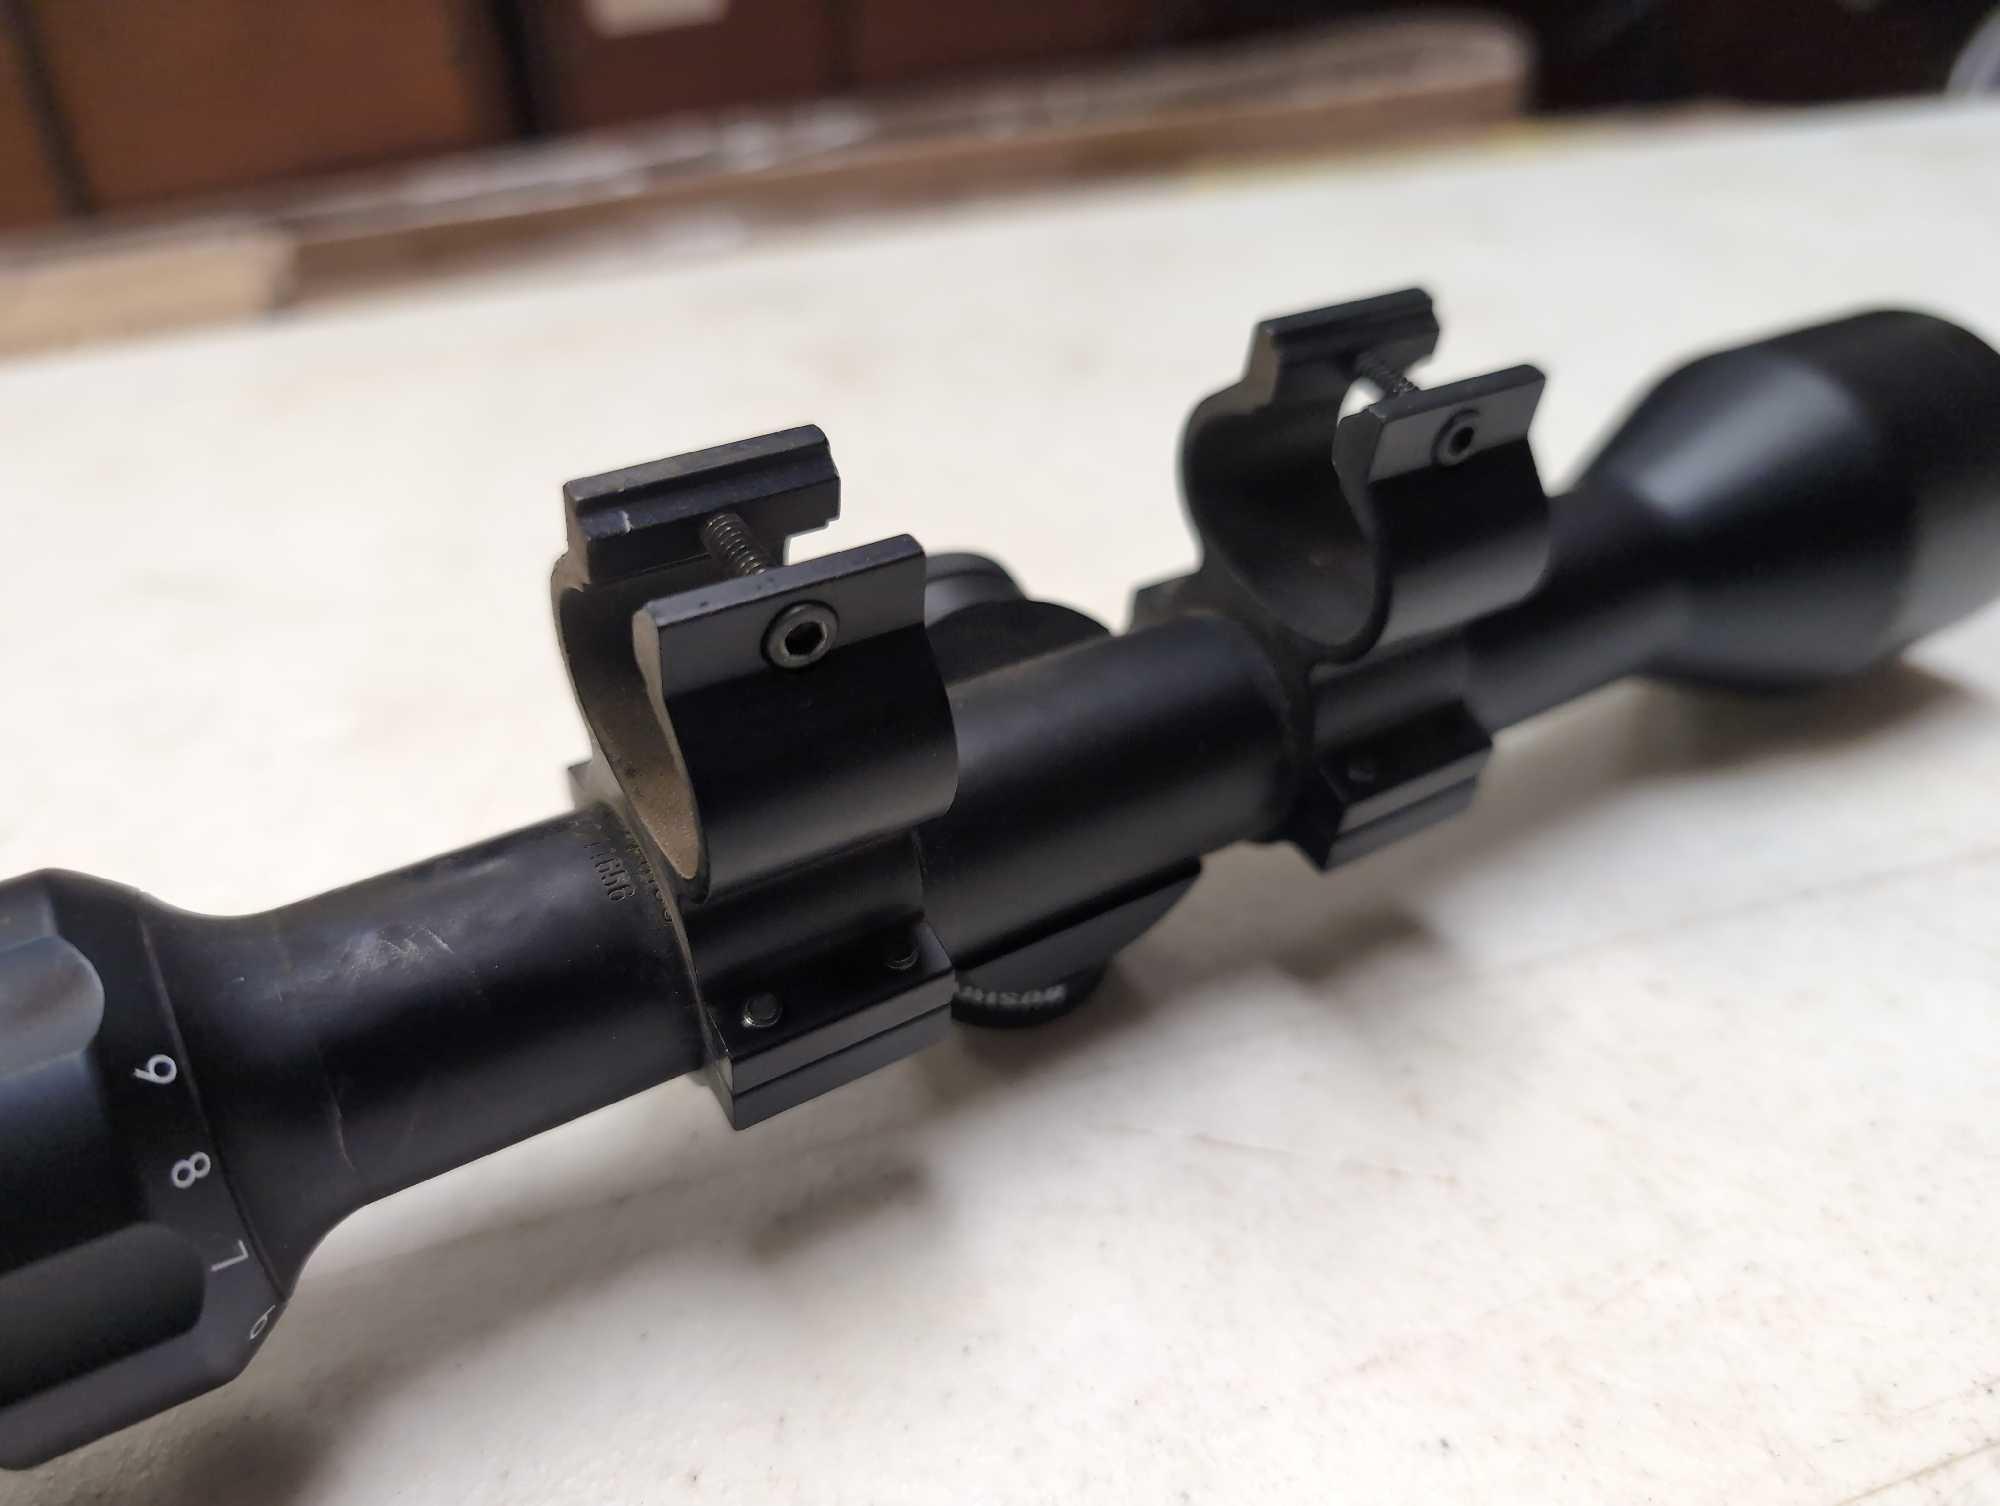 BUSHNELL 3-9X40 RIFLE SCOPE WITH MOUNTING BRACKETS - MODEL #73-3948, SERIAL #AO11656. COMES WITH